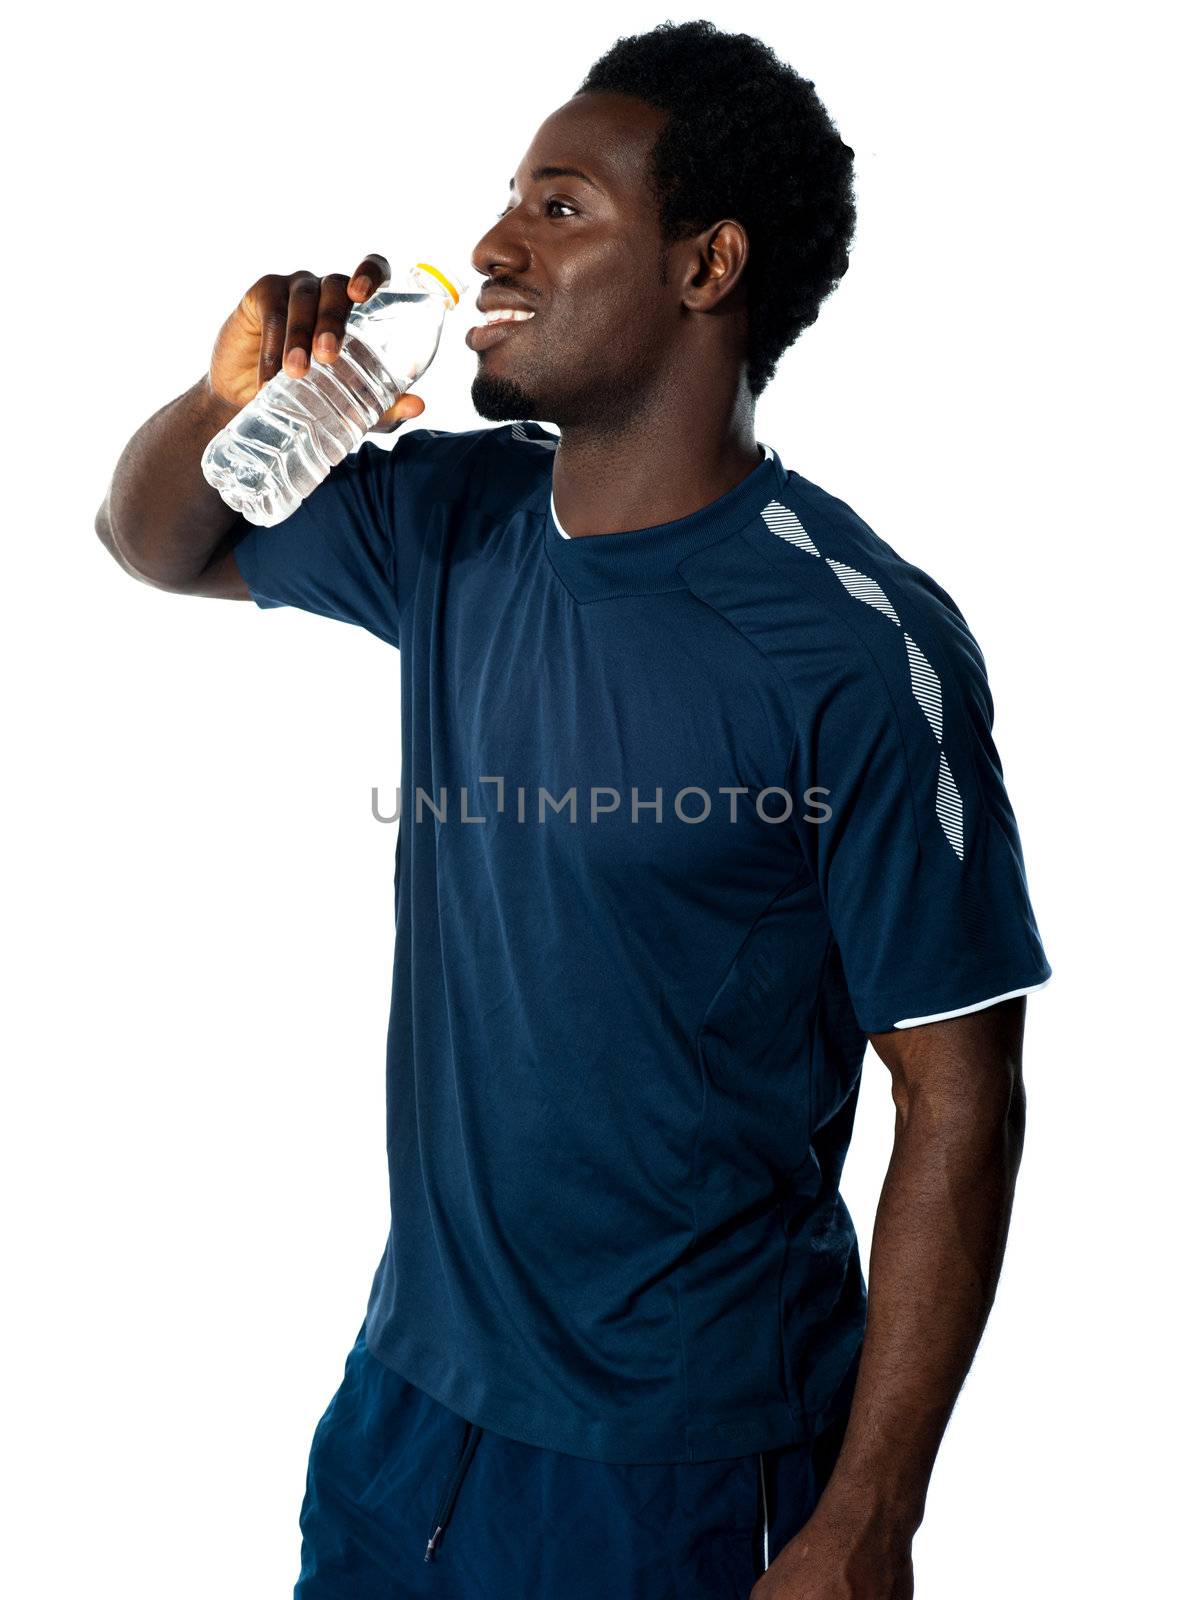 Tired african athlete drinking water against white background